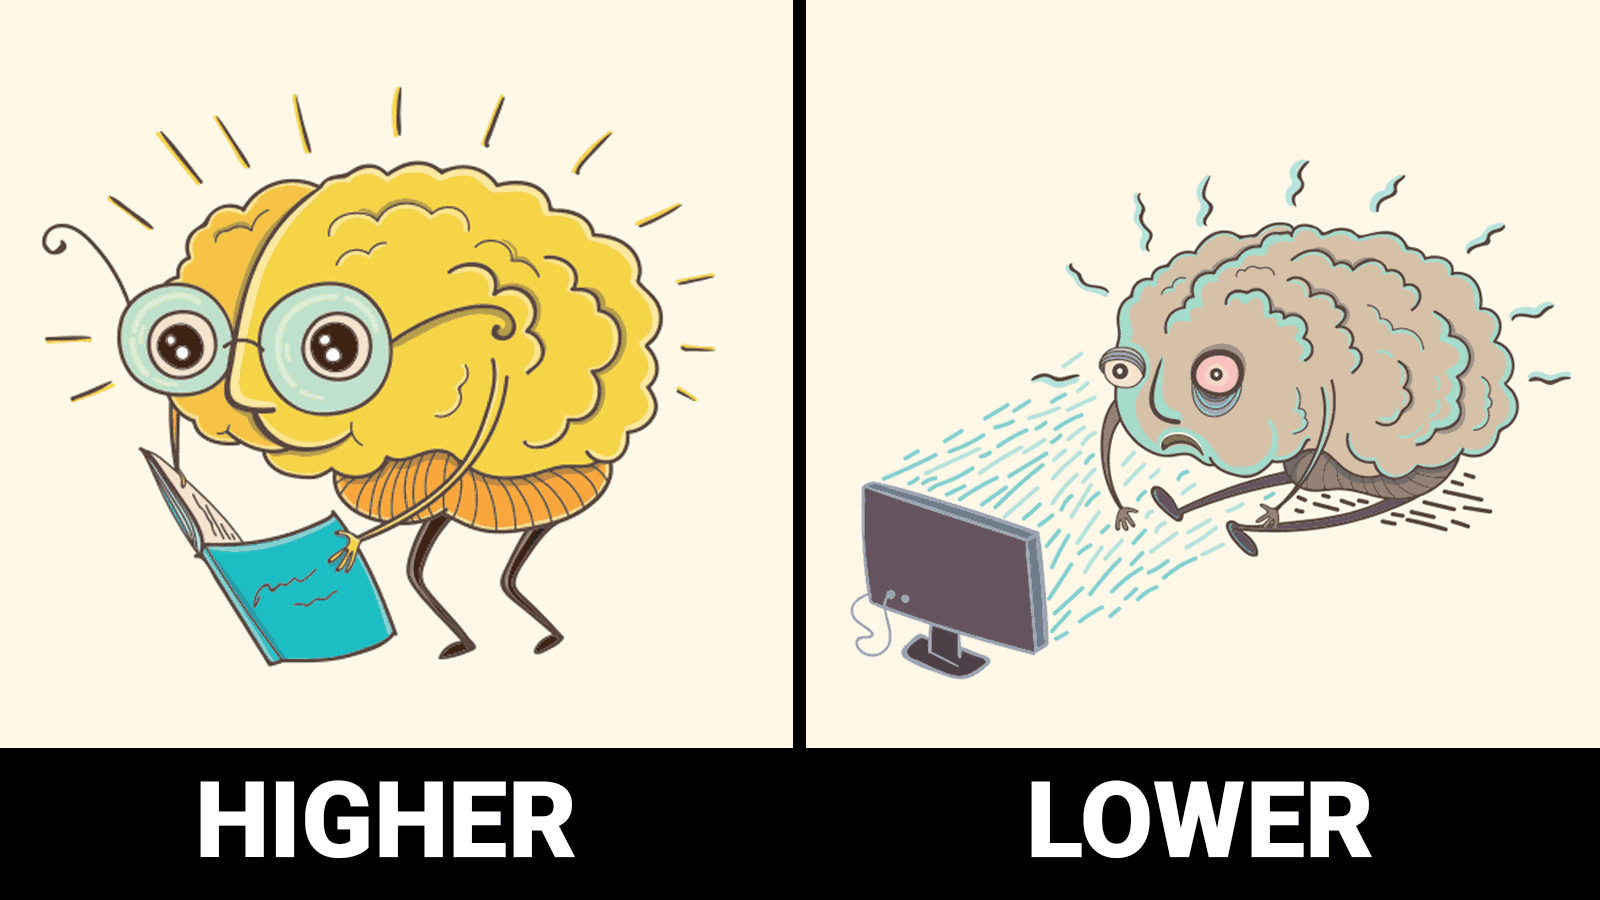 5 Habits that Lower Your IQ